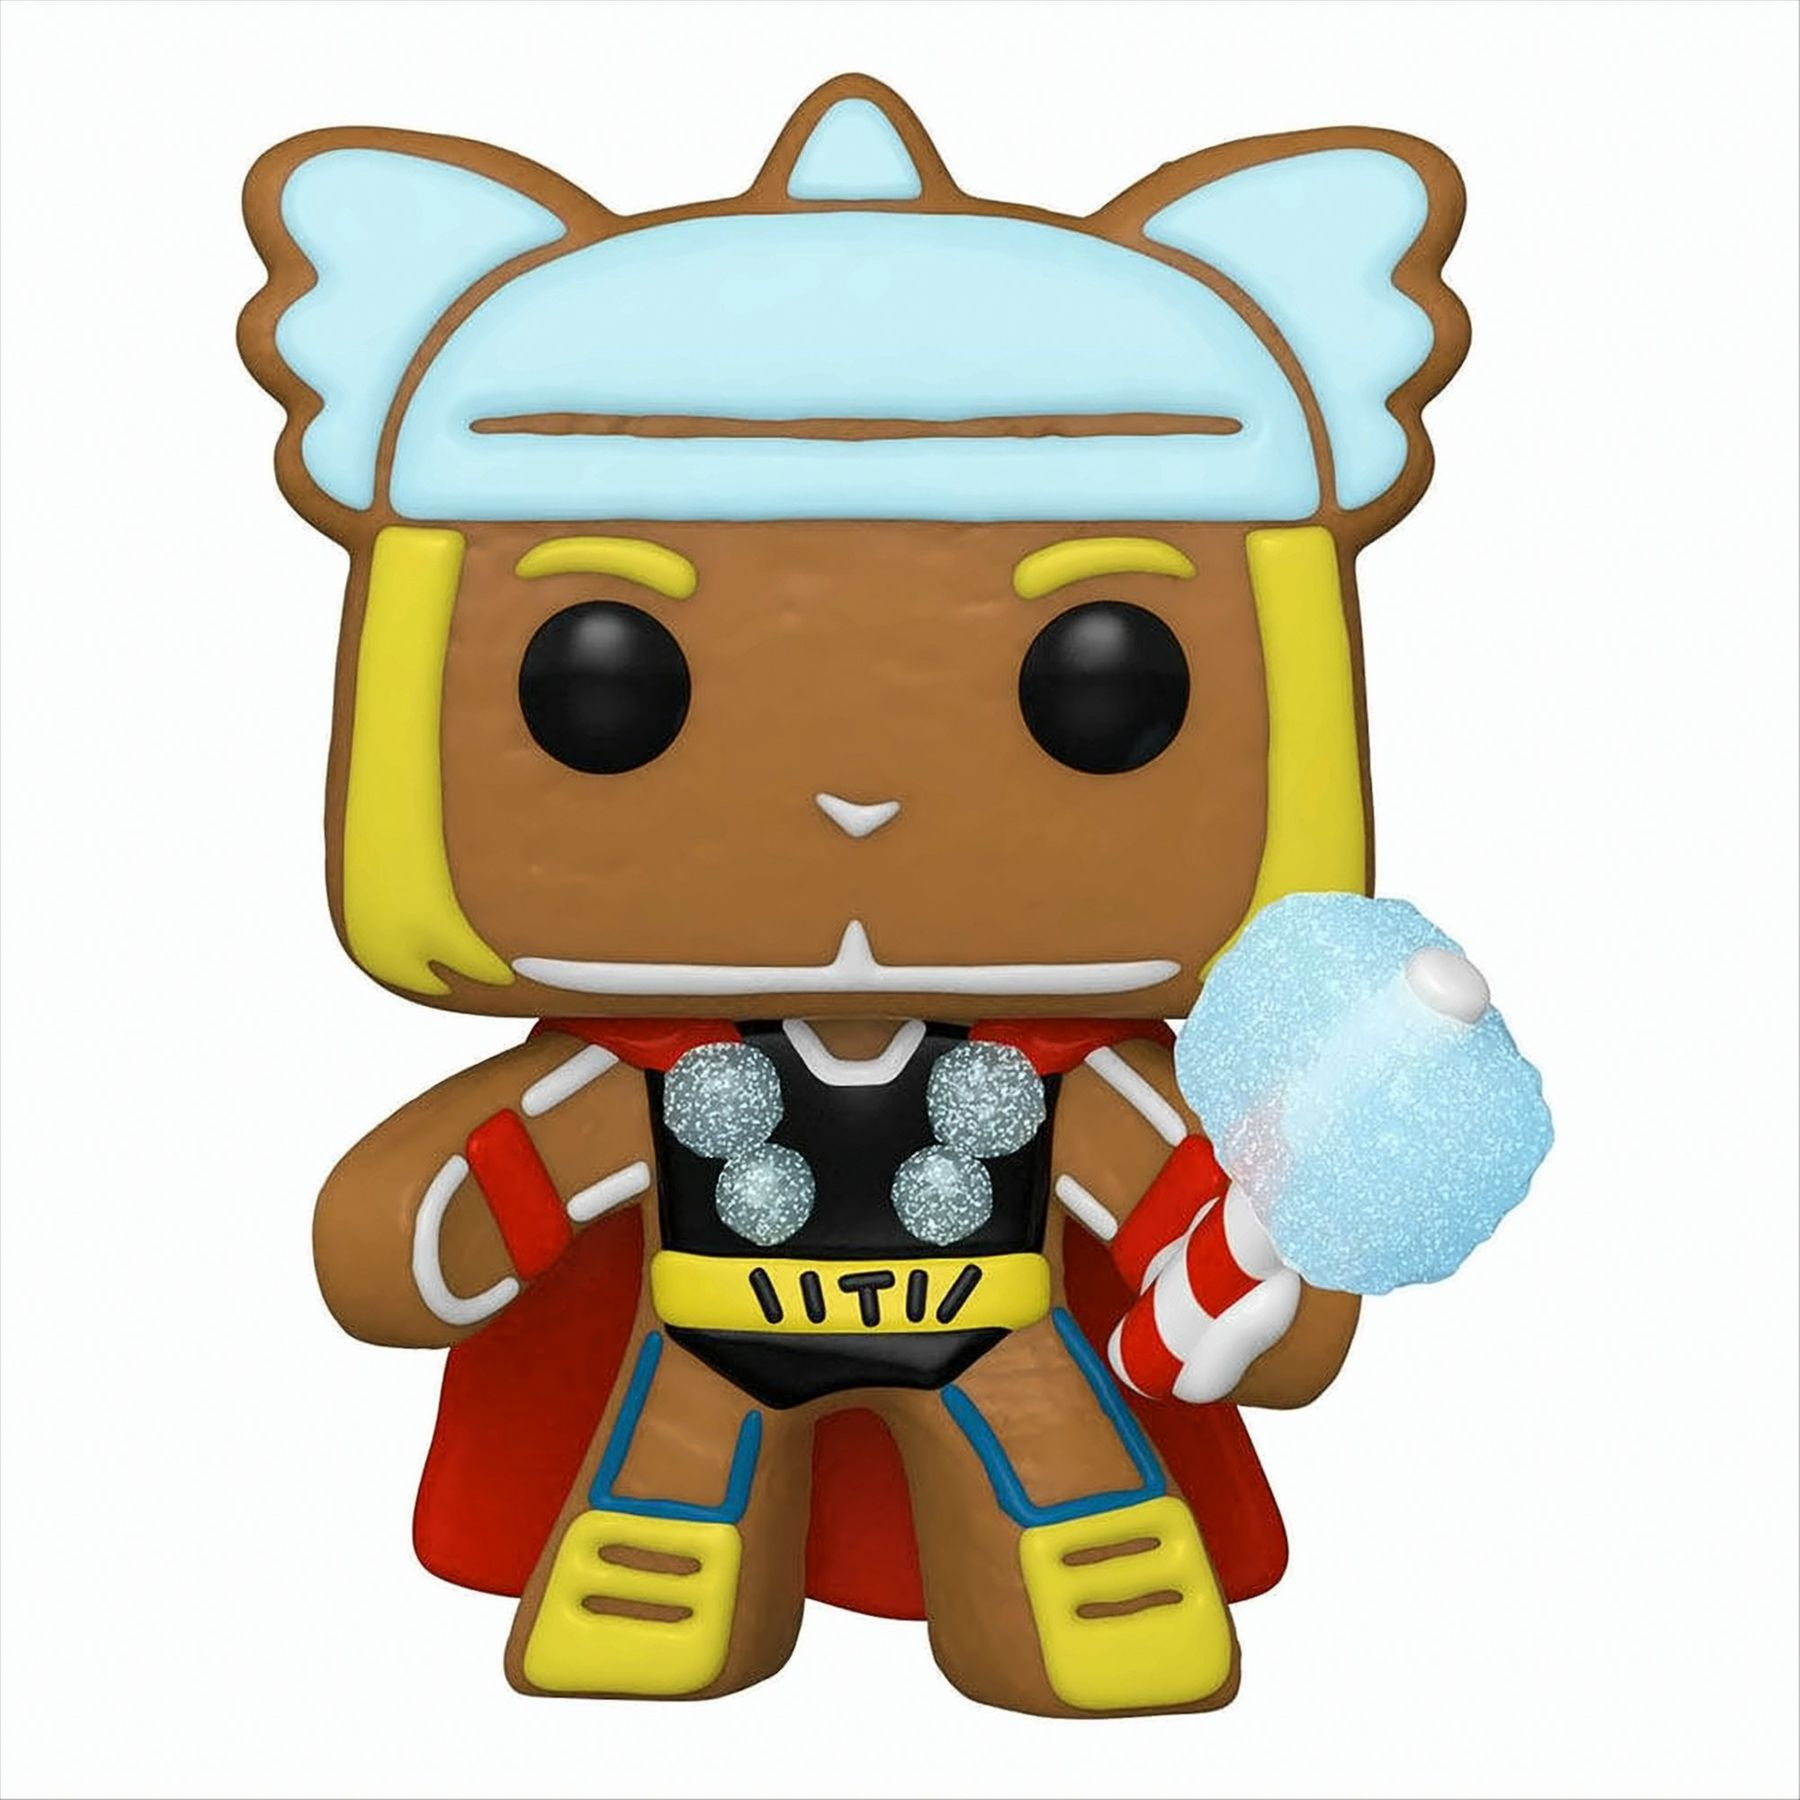 Funko Pop Gingerbread Thor Holiday Marvel